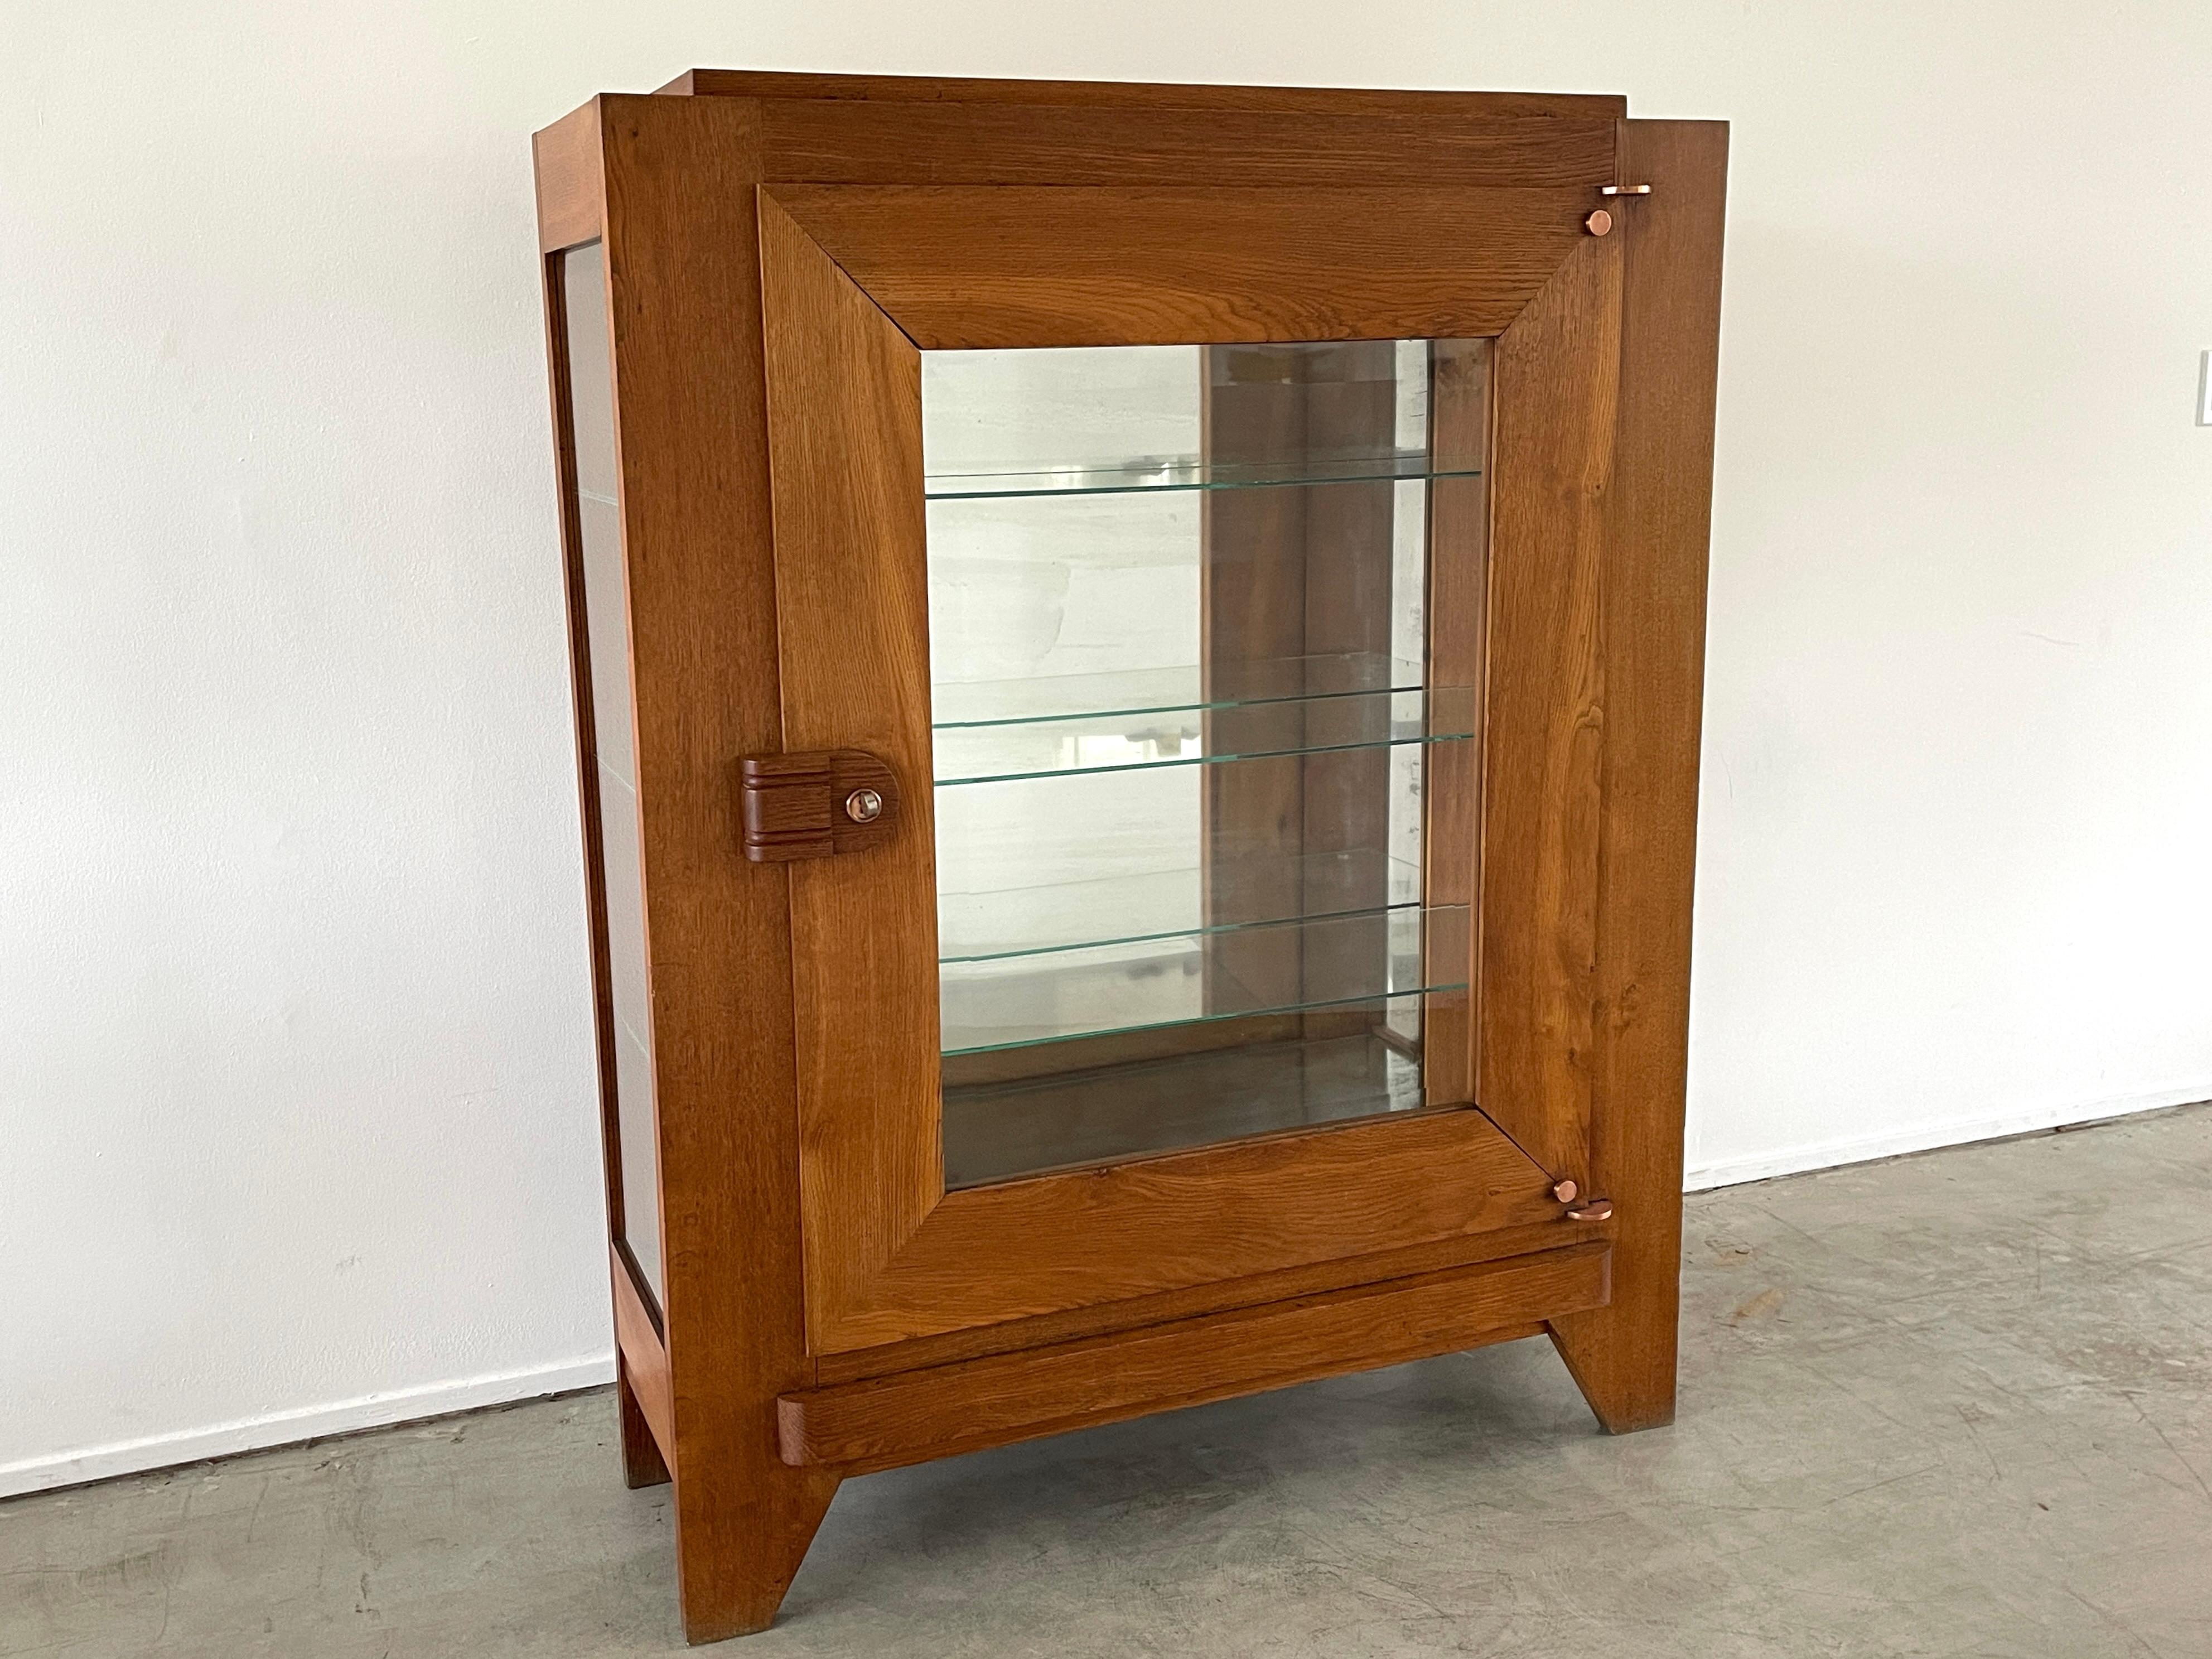 Great vitrine cabinet by Charles Dudouyt with glass sides and shelves 
Wonderful patina to wood.